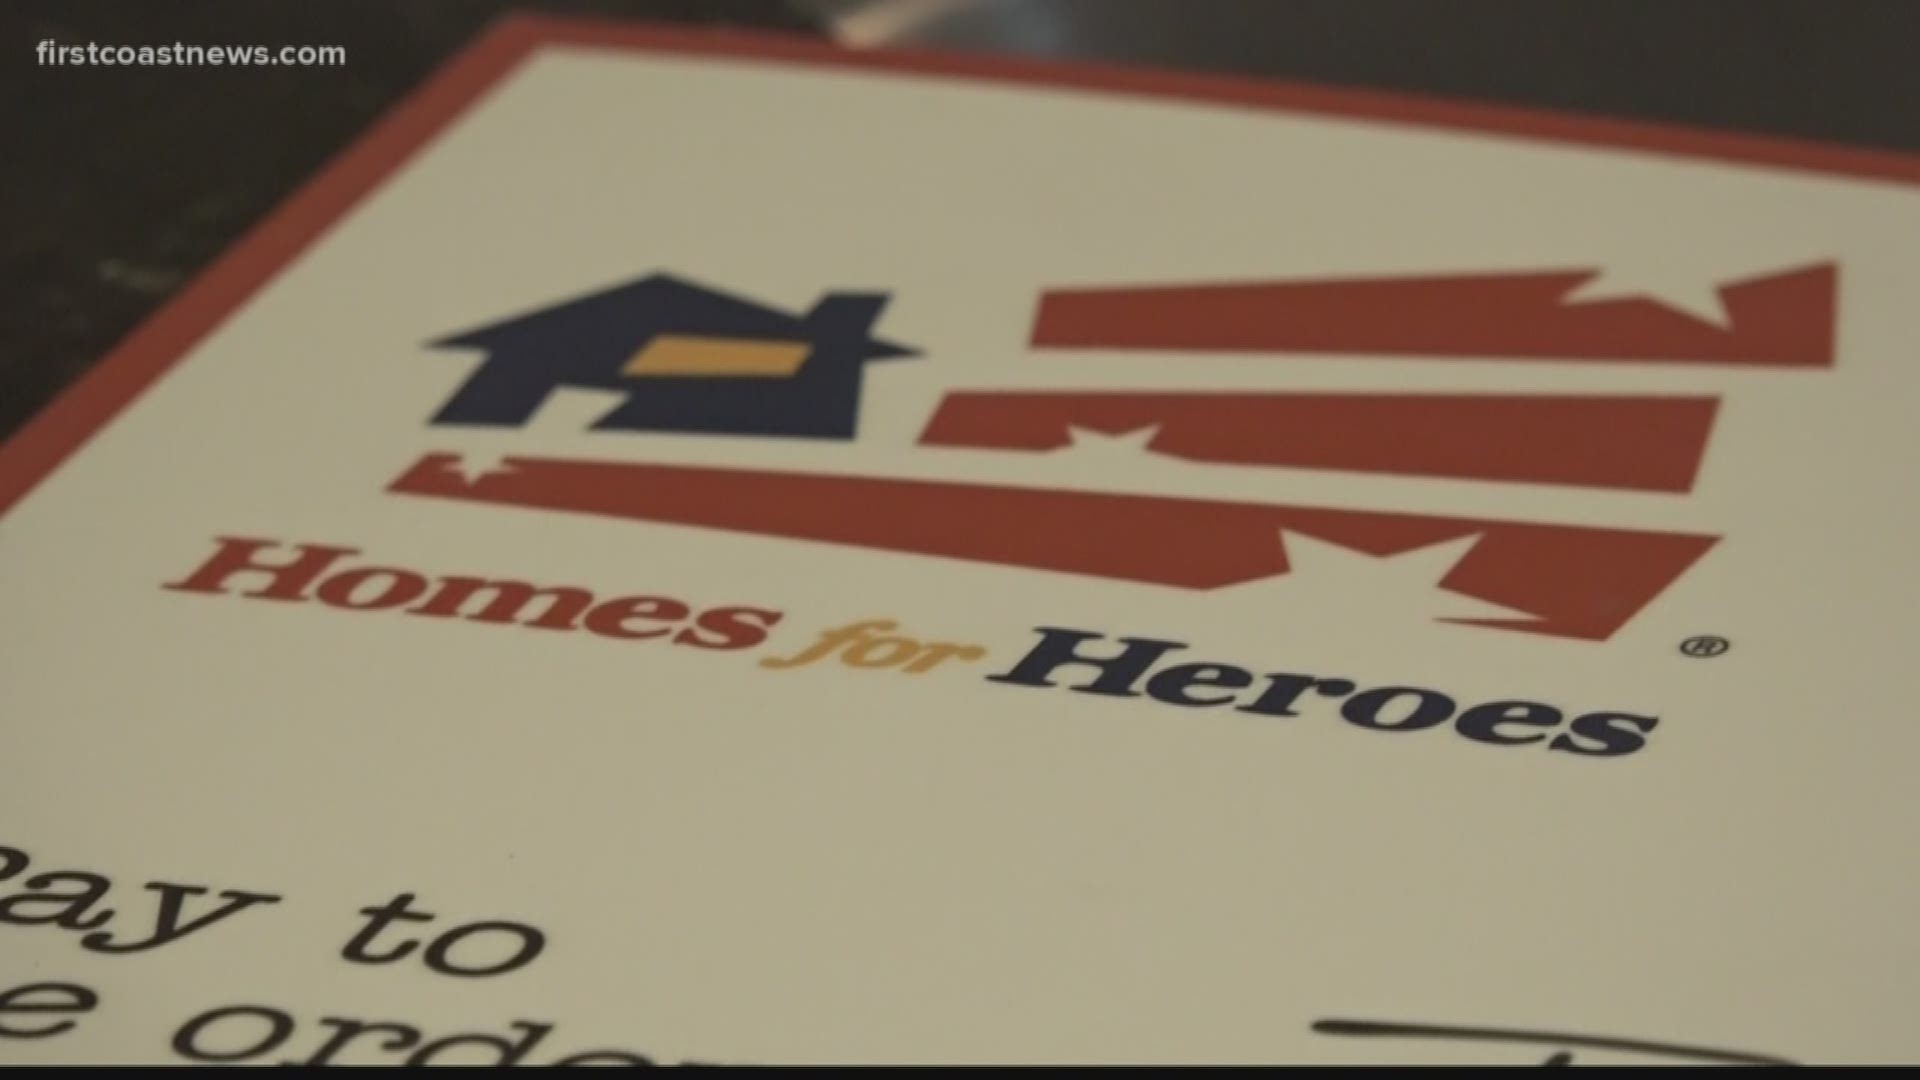 Homes for Heroes helps military, first responders, teachers and healthcare workers buy and sell their homes for free.